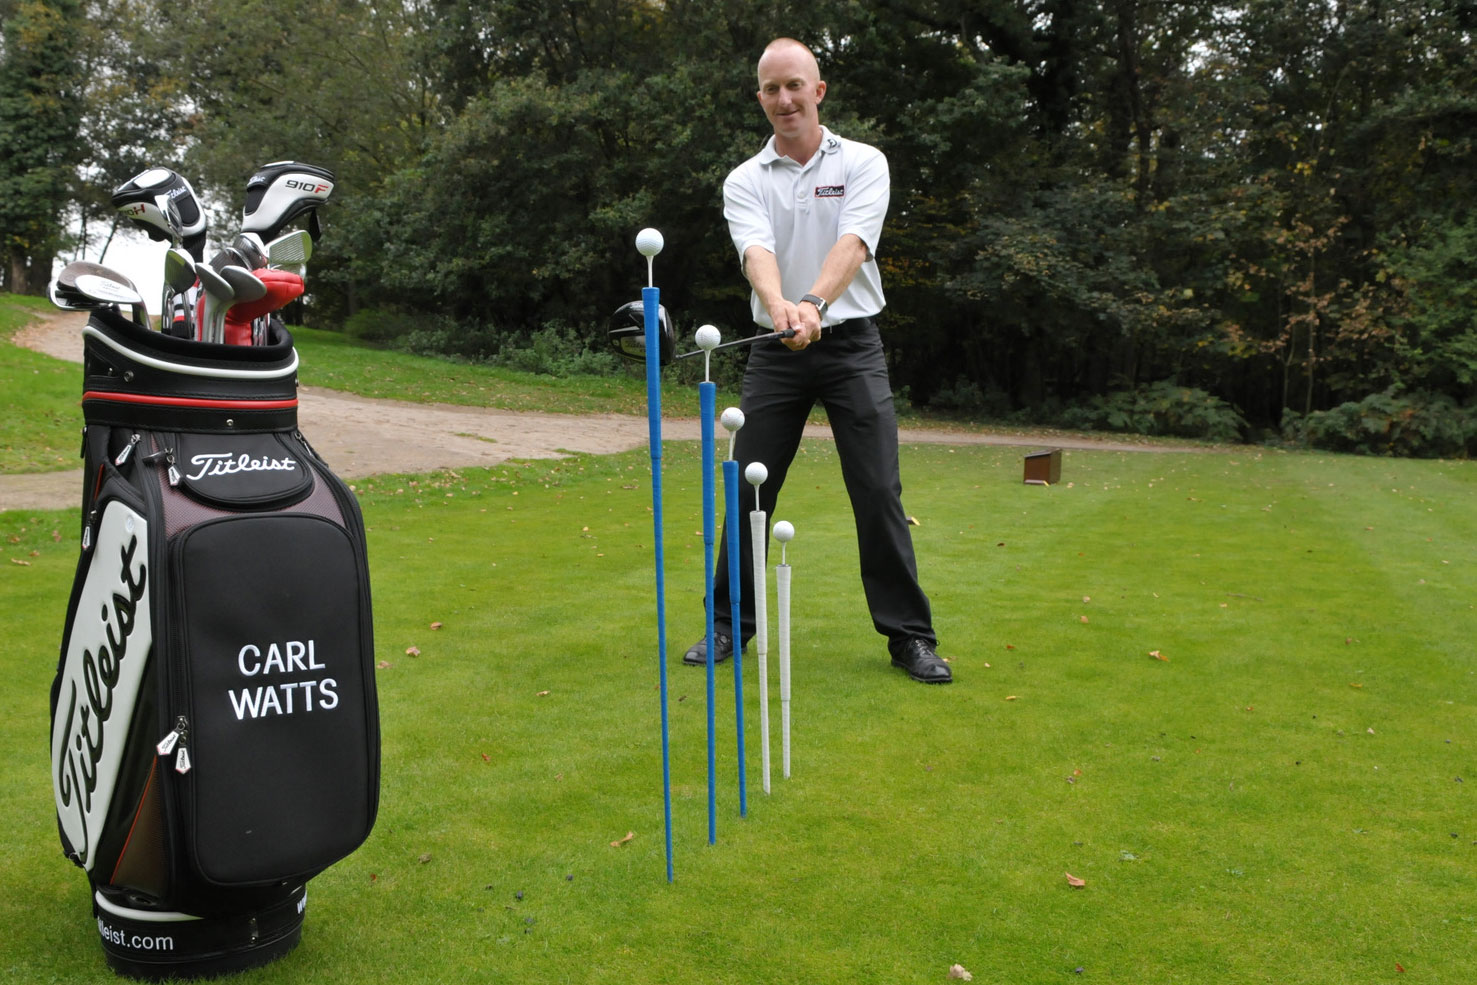 Carl Watts is the teaching professional at Mannings Heath Golf Club in Sussex